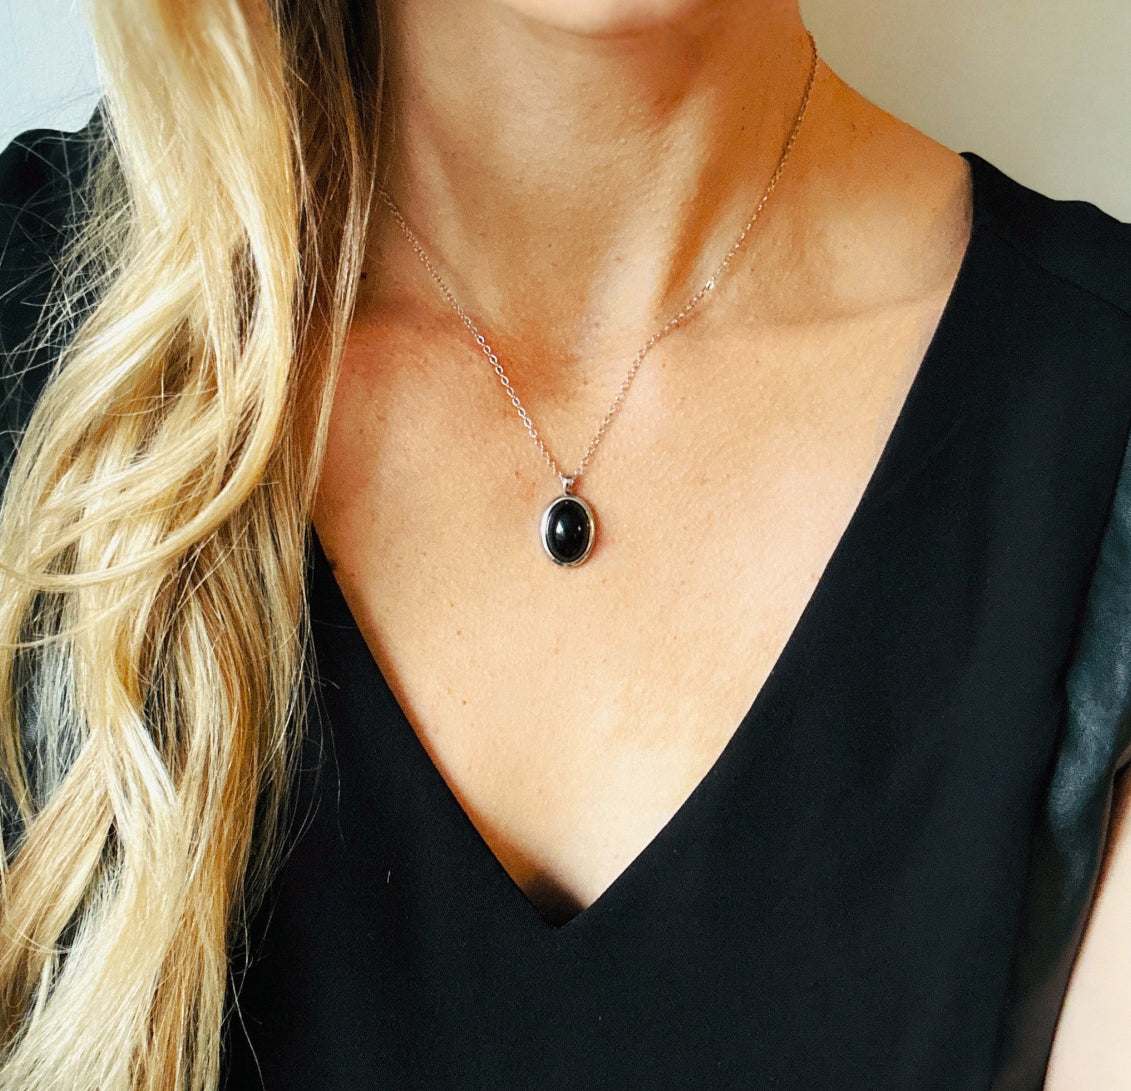 The Energy Protection Necklace